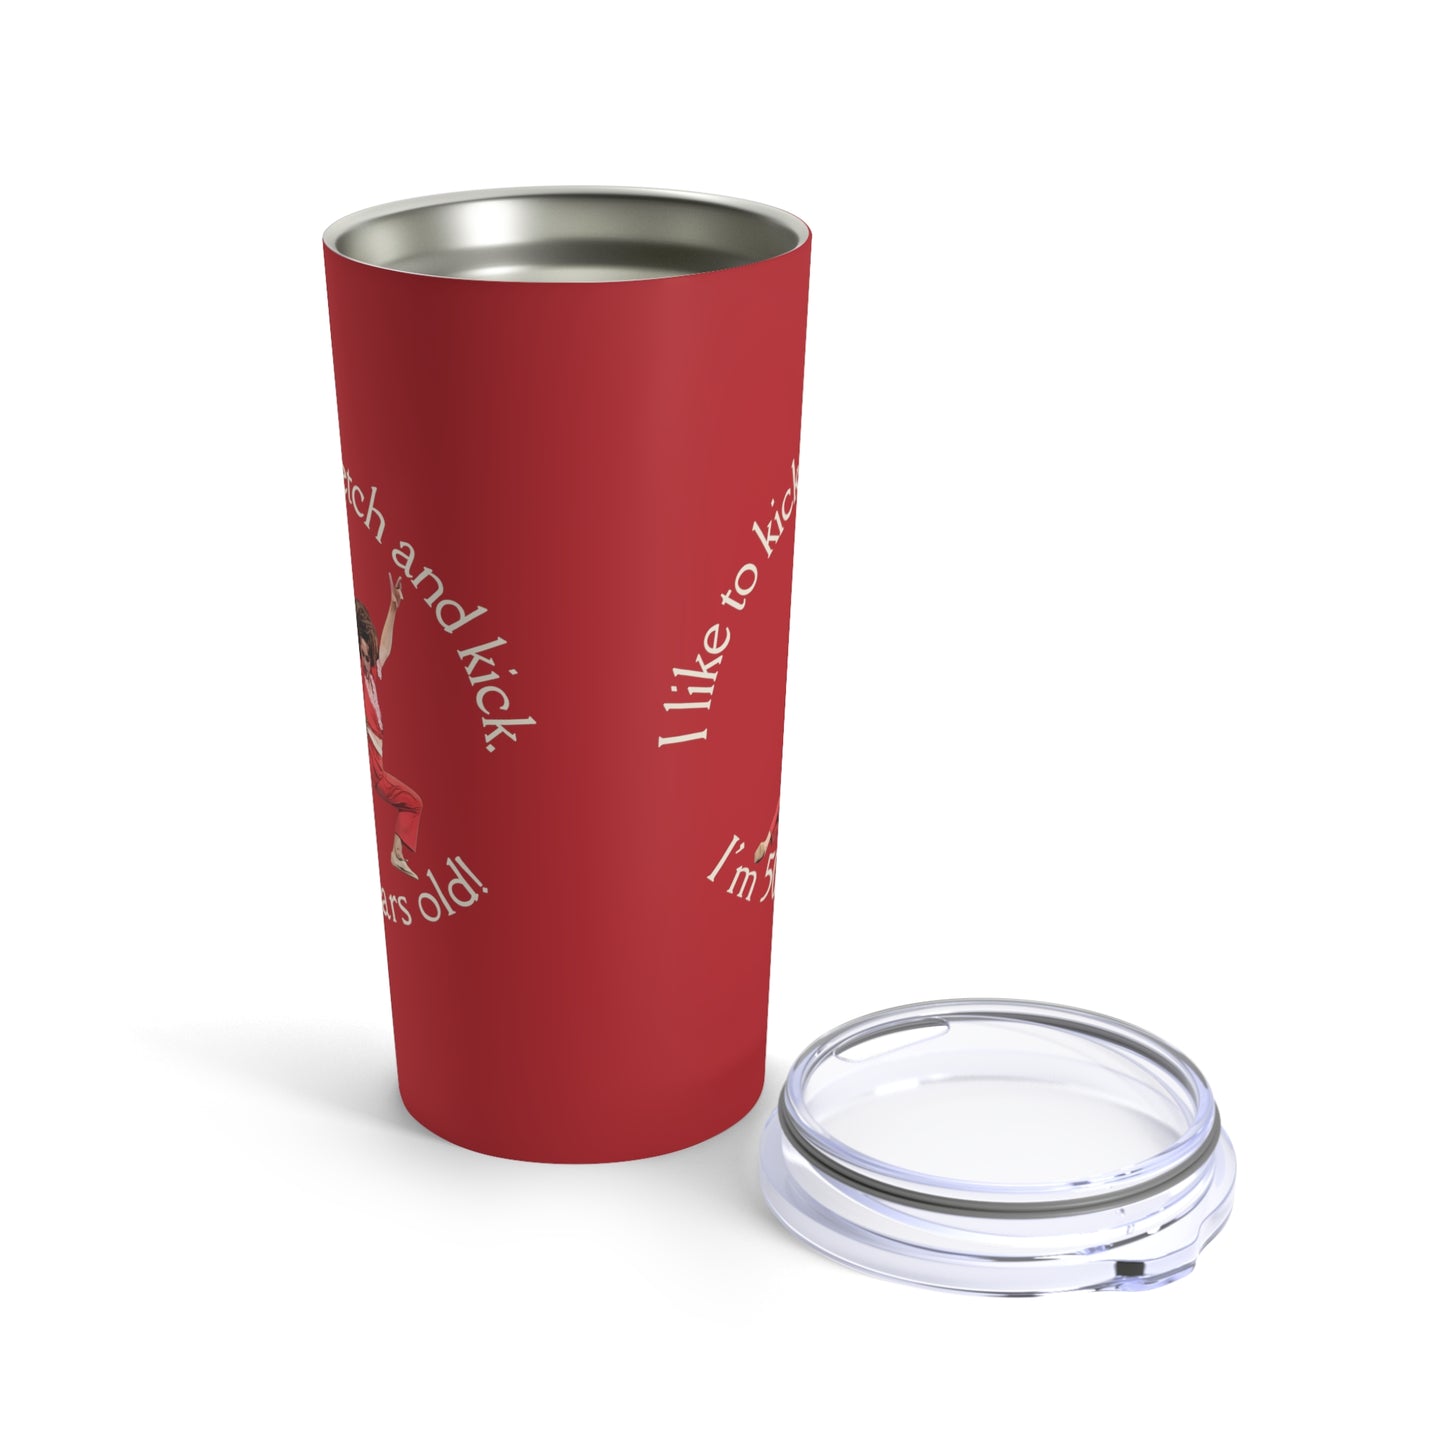 Red Tumbler 20oz, I'm 50, Sally O'Malley Tumbler, Molly Shannon, I like to Kick and Stretch